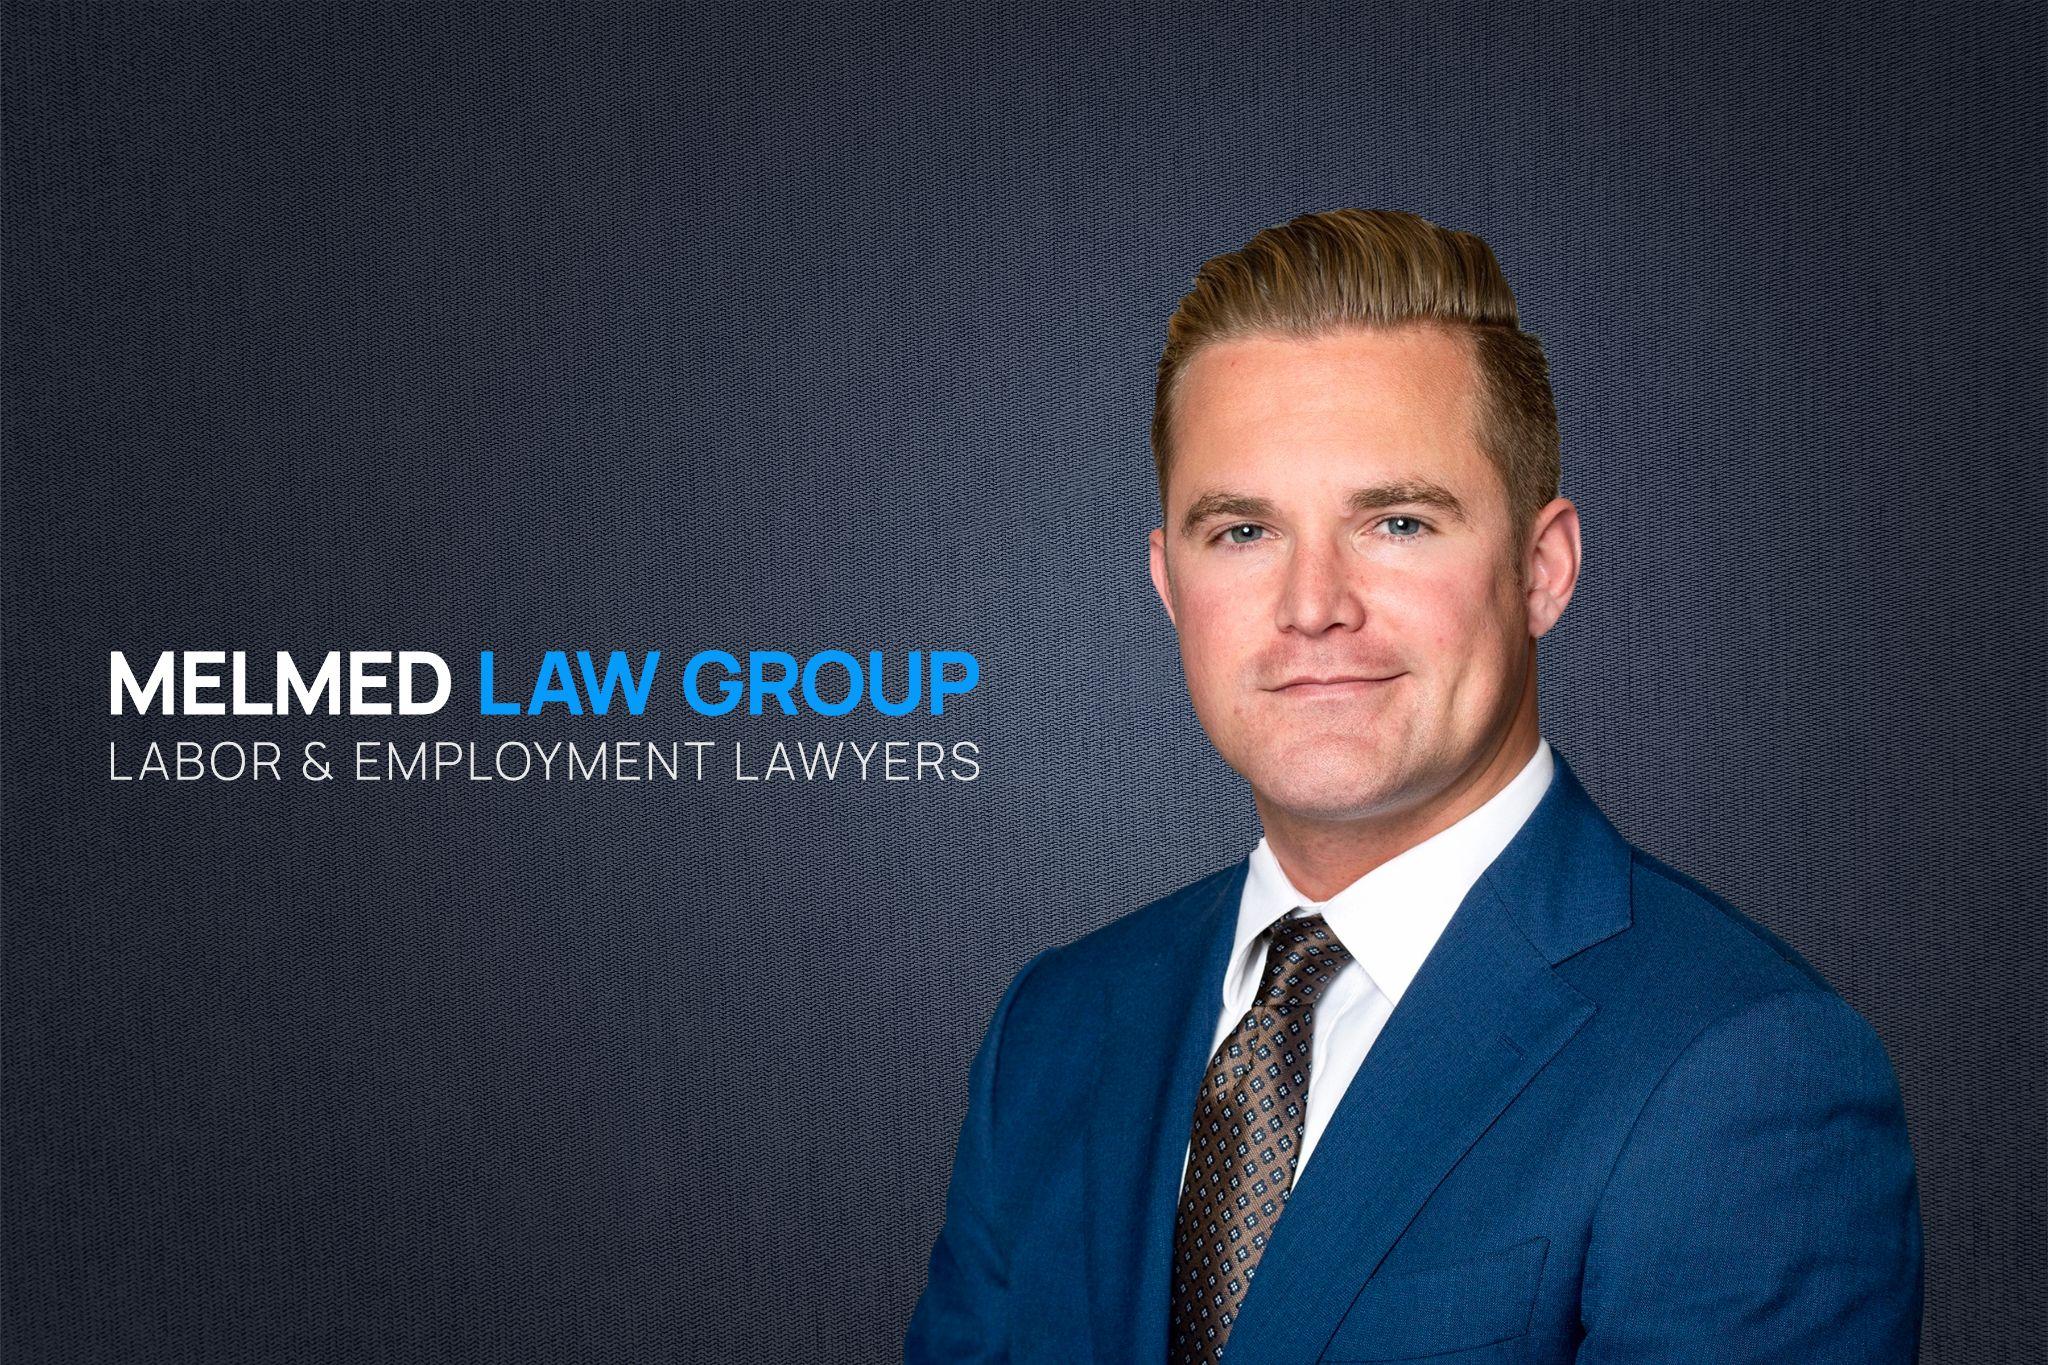 Meet Eric Lund, Attorney at Melmed Law Group